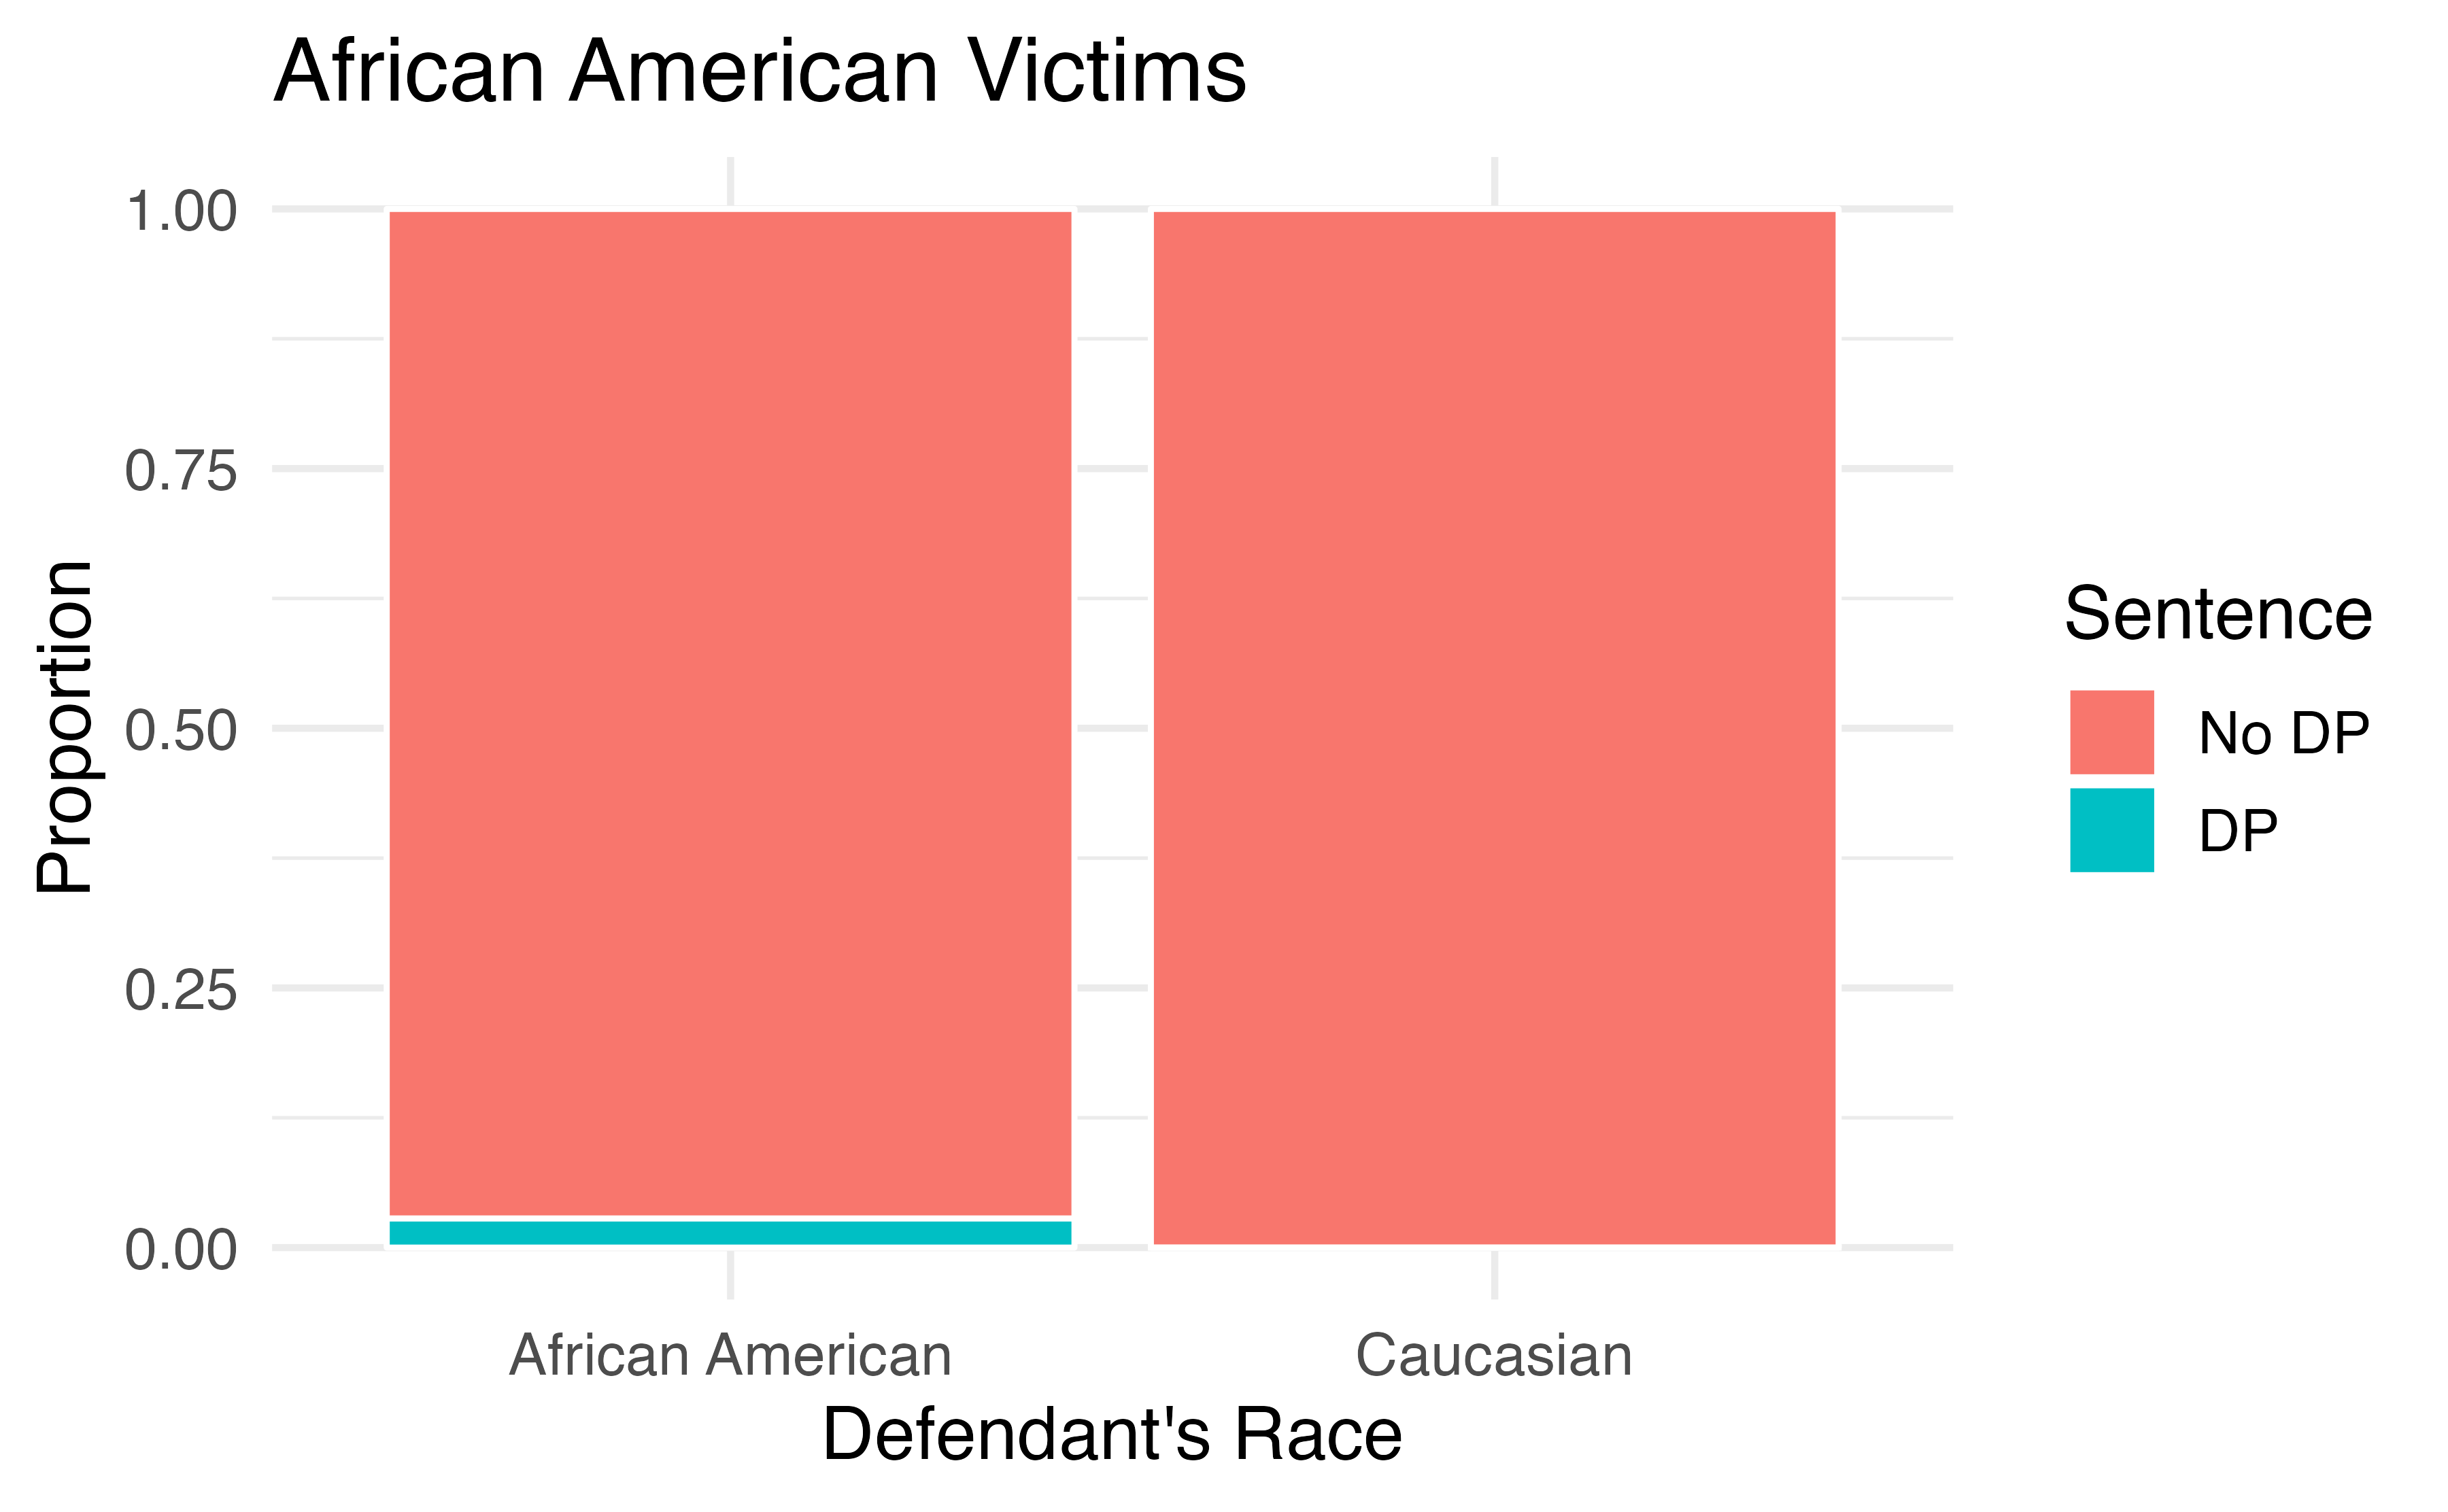 Segmented bar plots comparing the proportion of Caucasian and African American defendants who received the death penalty; separate plots for Caucasian victims and African American victims.